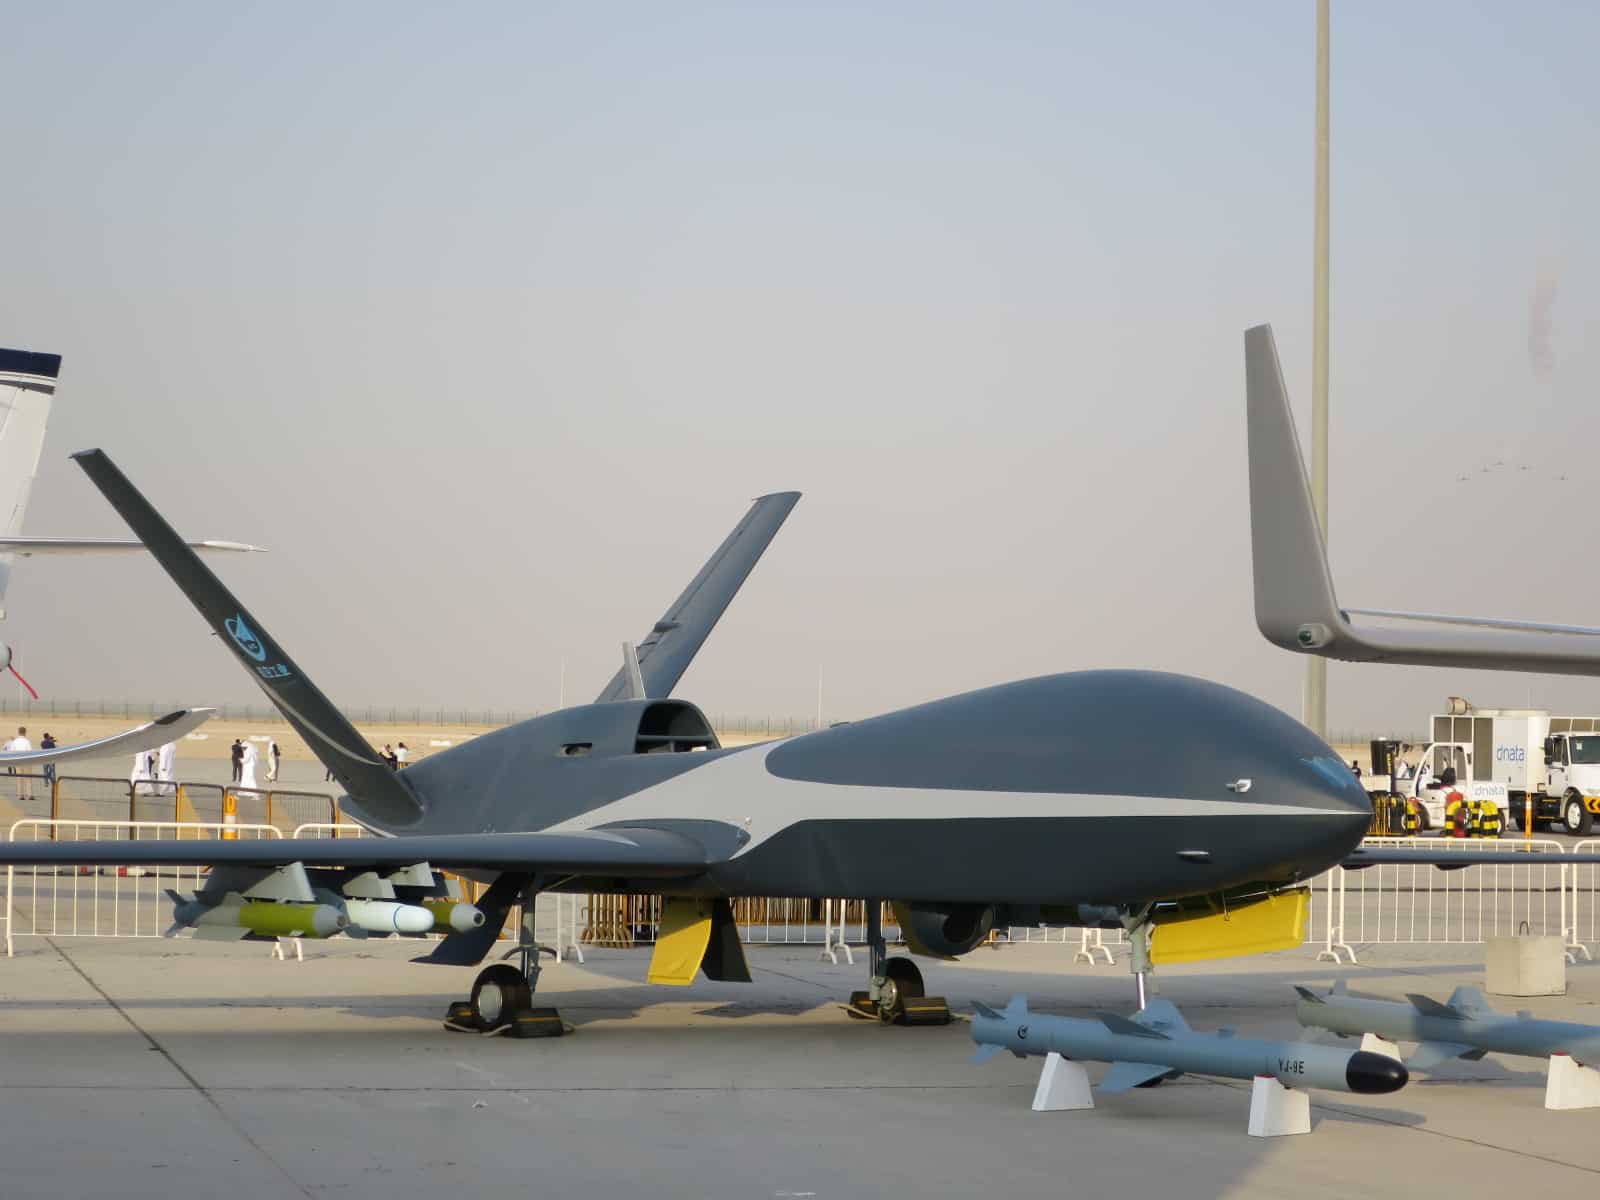 China unveils WZ-7 Soaring Dragon - RQ-4 Global Hawk counterpart with 7,000km range and 750km/h speed